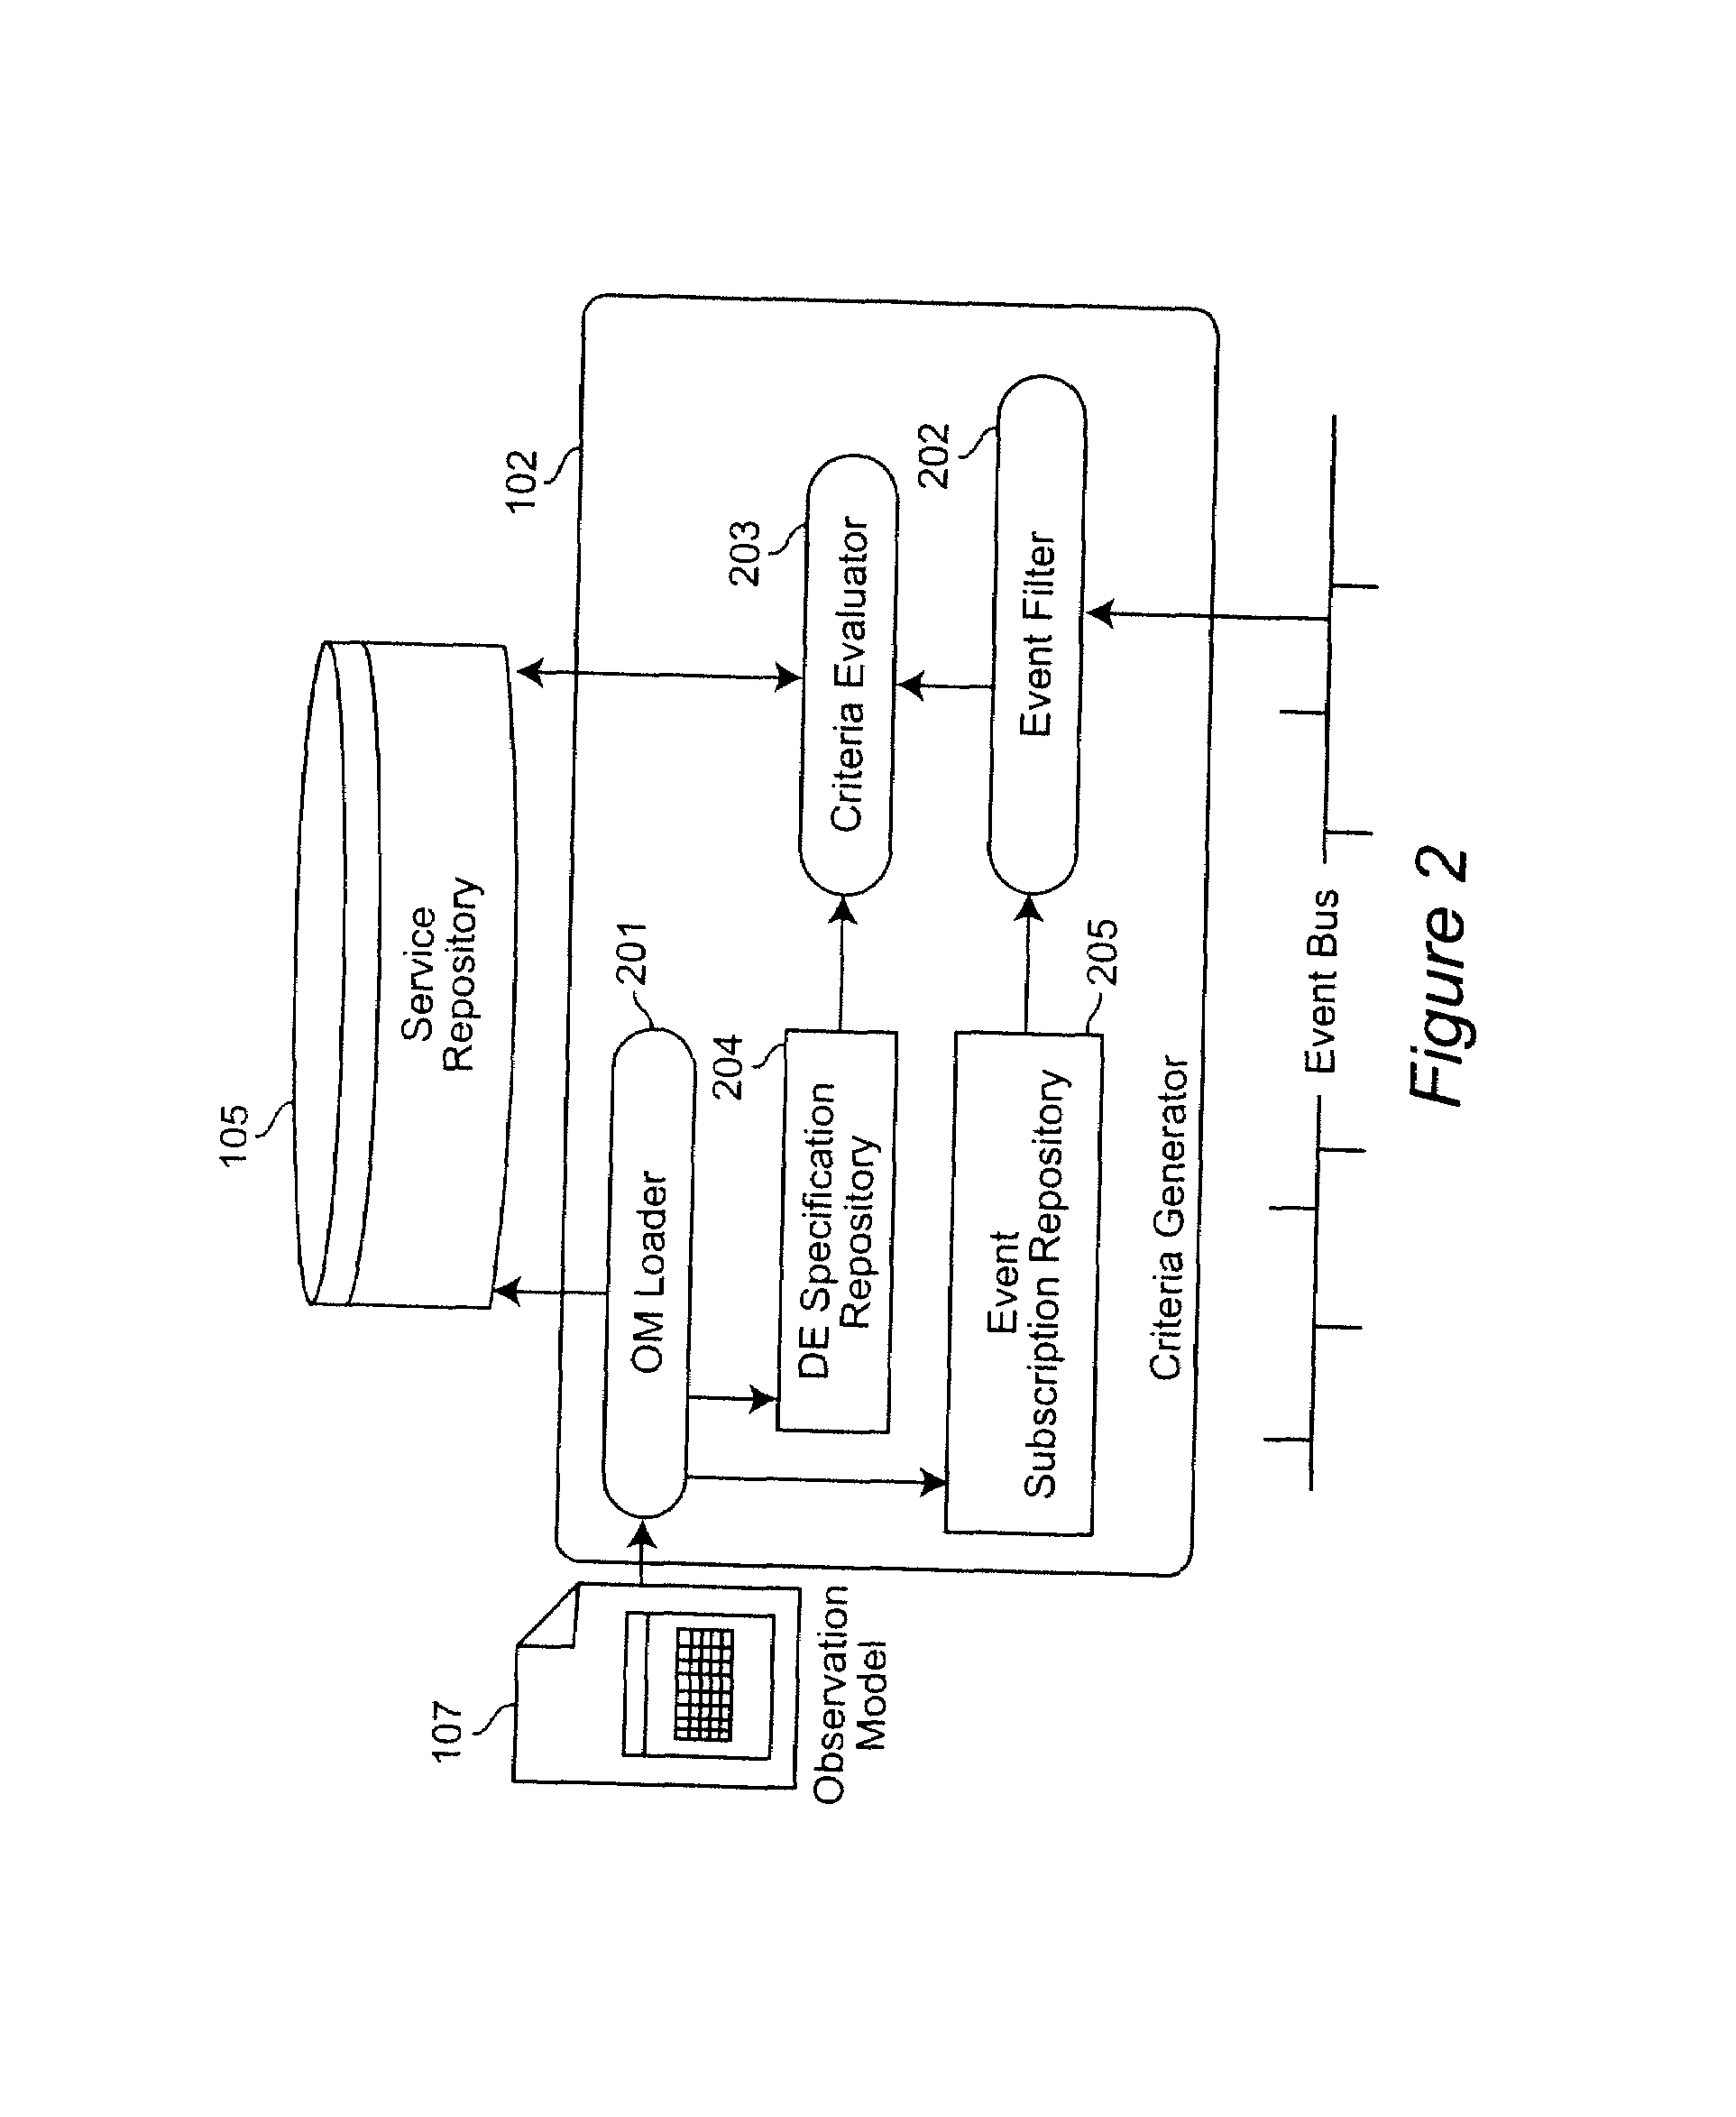 Method for Web Services QoS Observation and Dynamic Selection